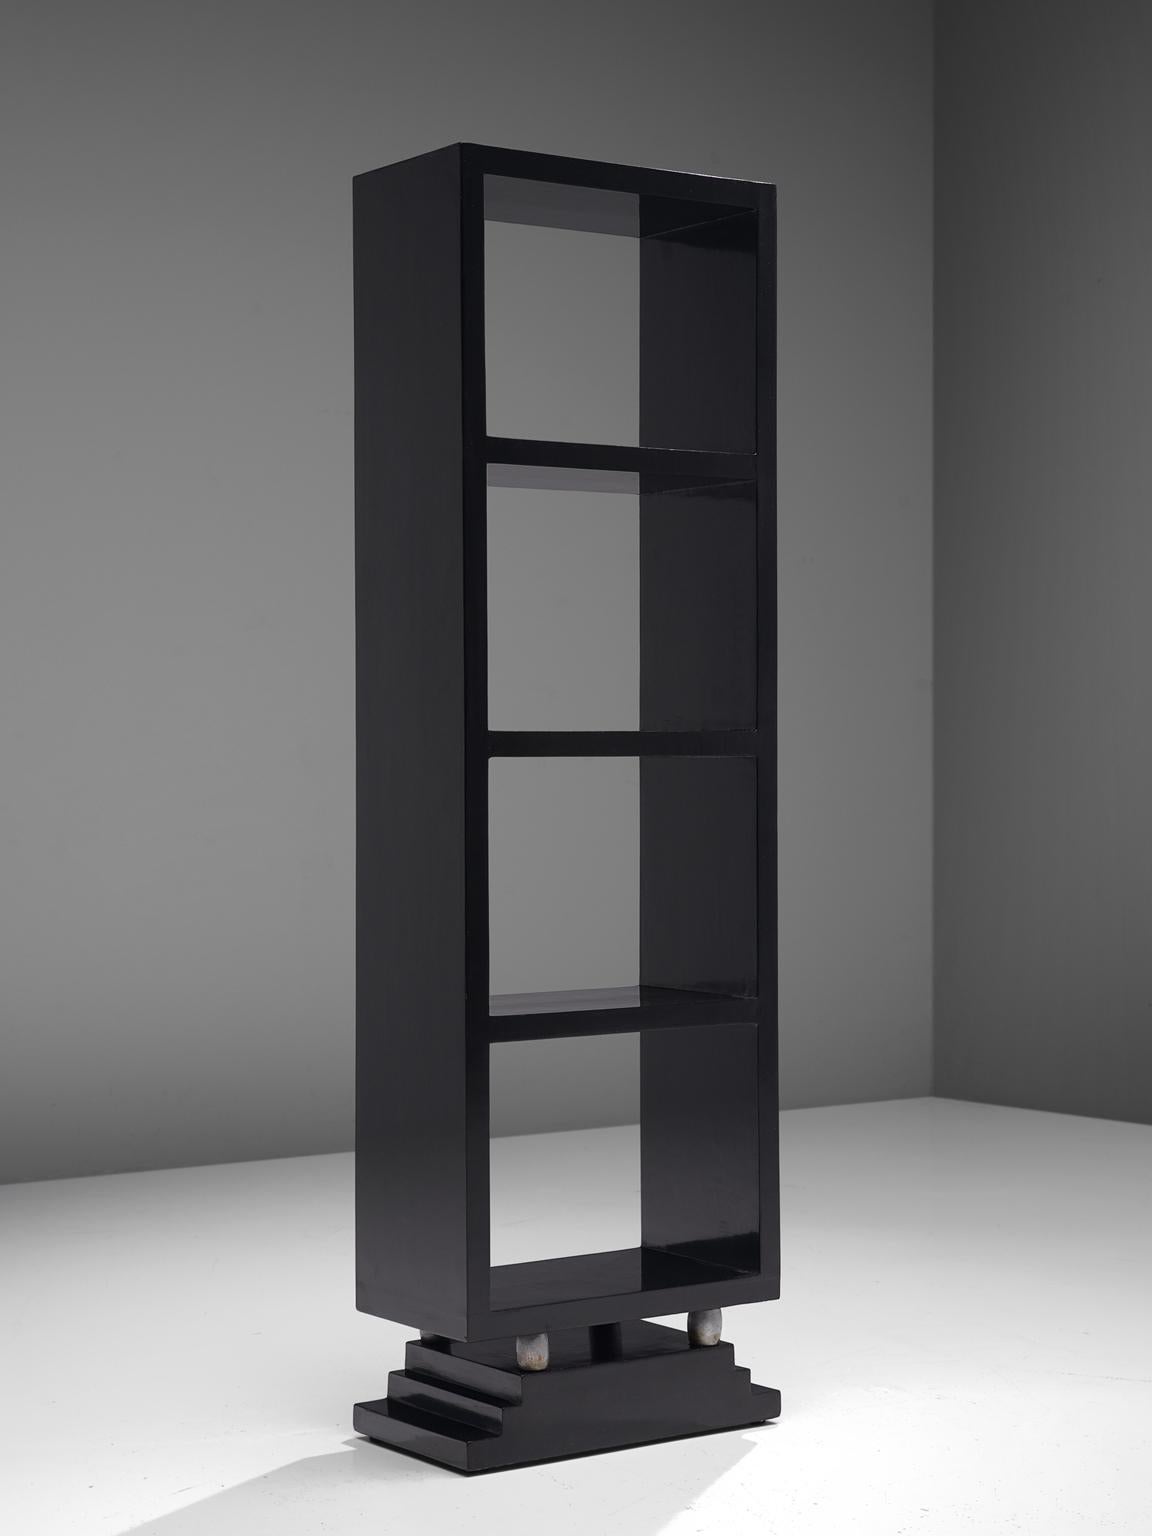 Bookcases in the style of Osvaldo Borsani, black veneered wood and metal, Italy, 1950s.

Elegant black lacquered bookcase. With its thick, high gloss lacquered lines the pieces have a graphical expression. The storage unit rests on metal legs,